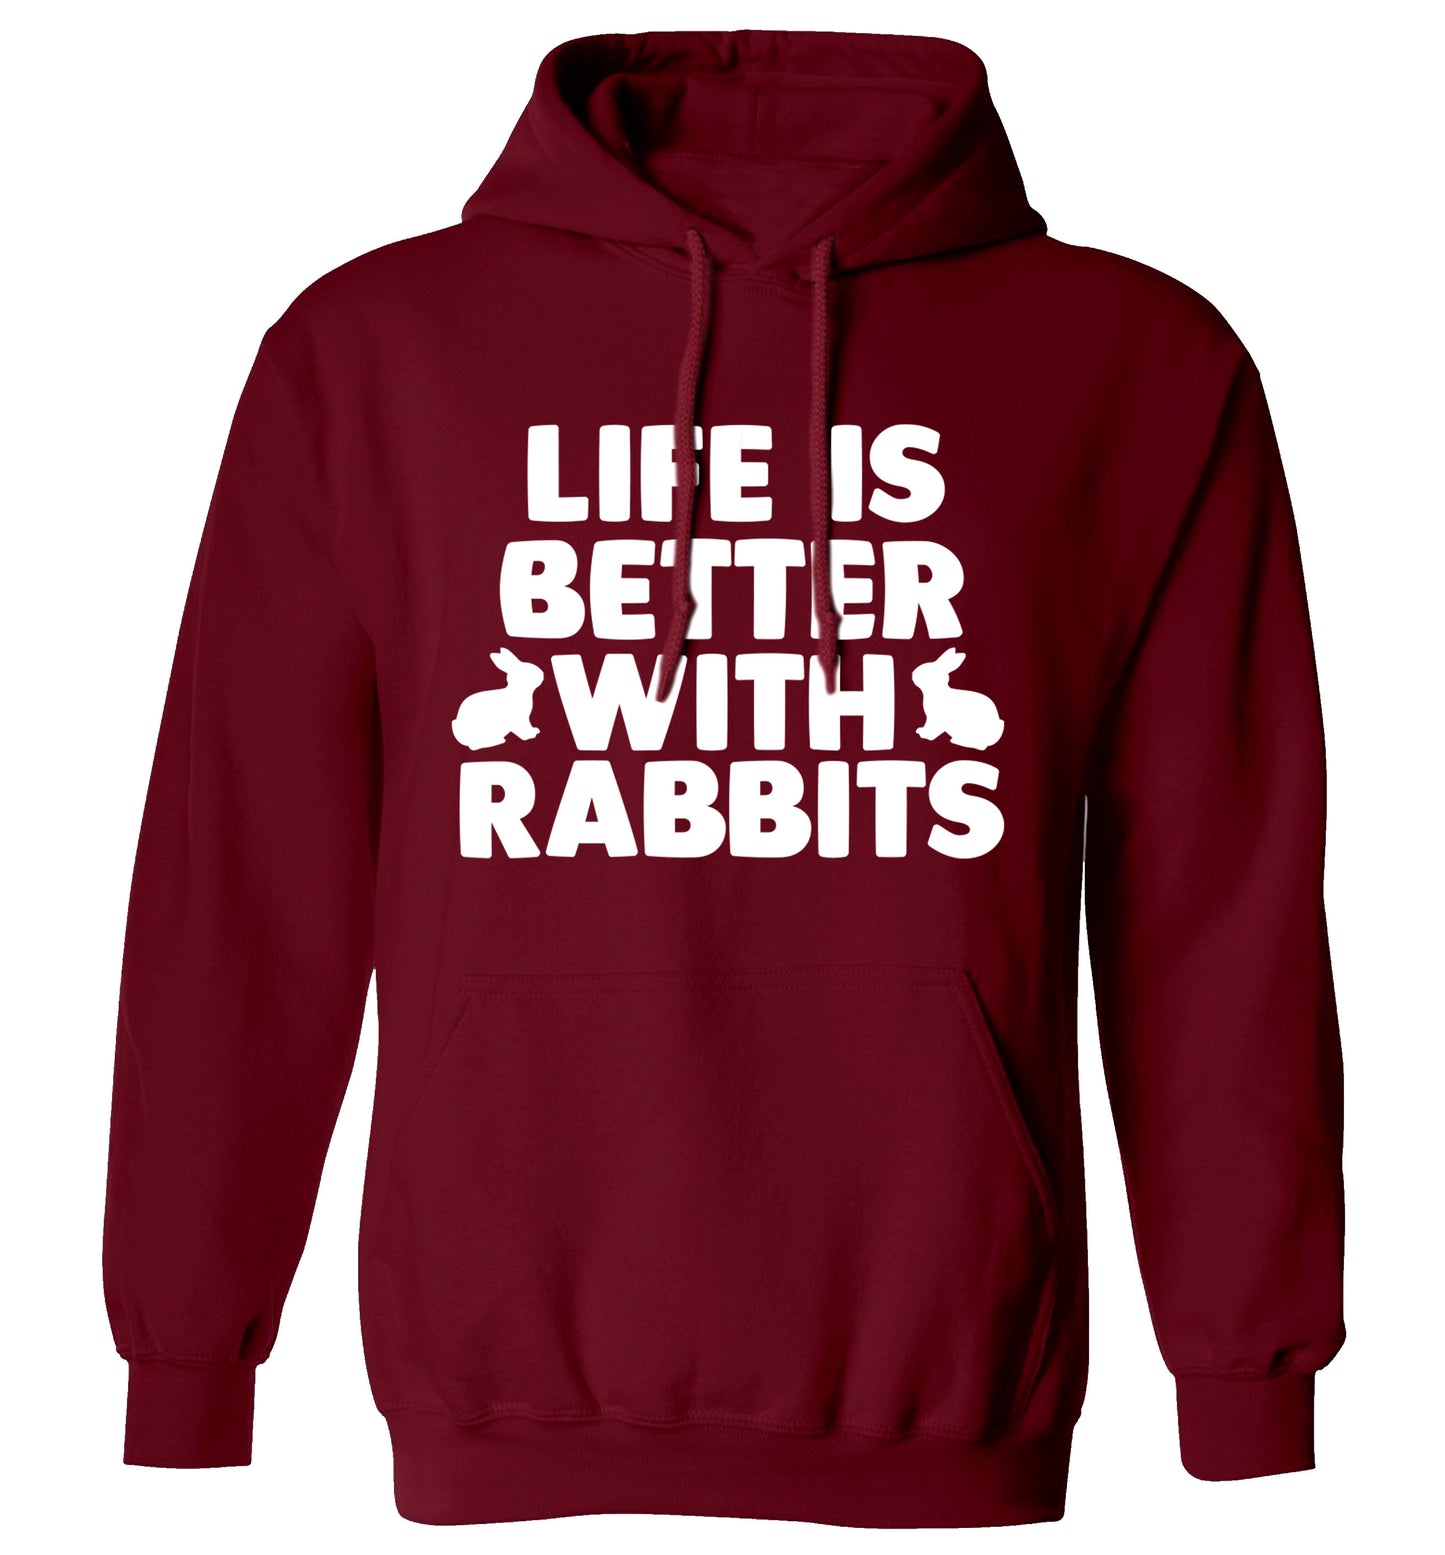 Life is better with rabbits adults unisex maroon hoodie 2XL